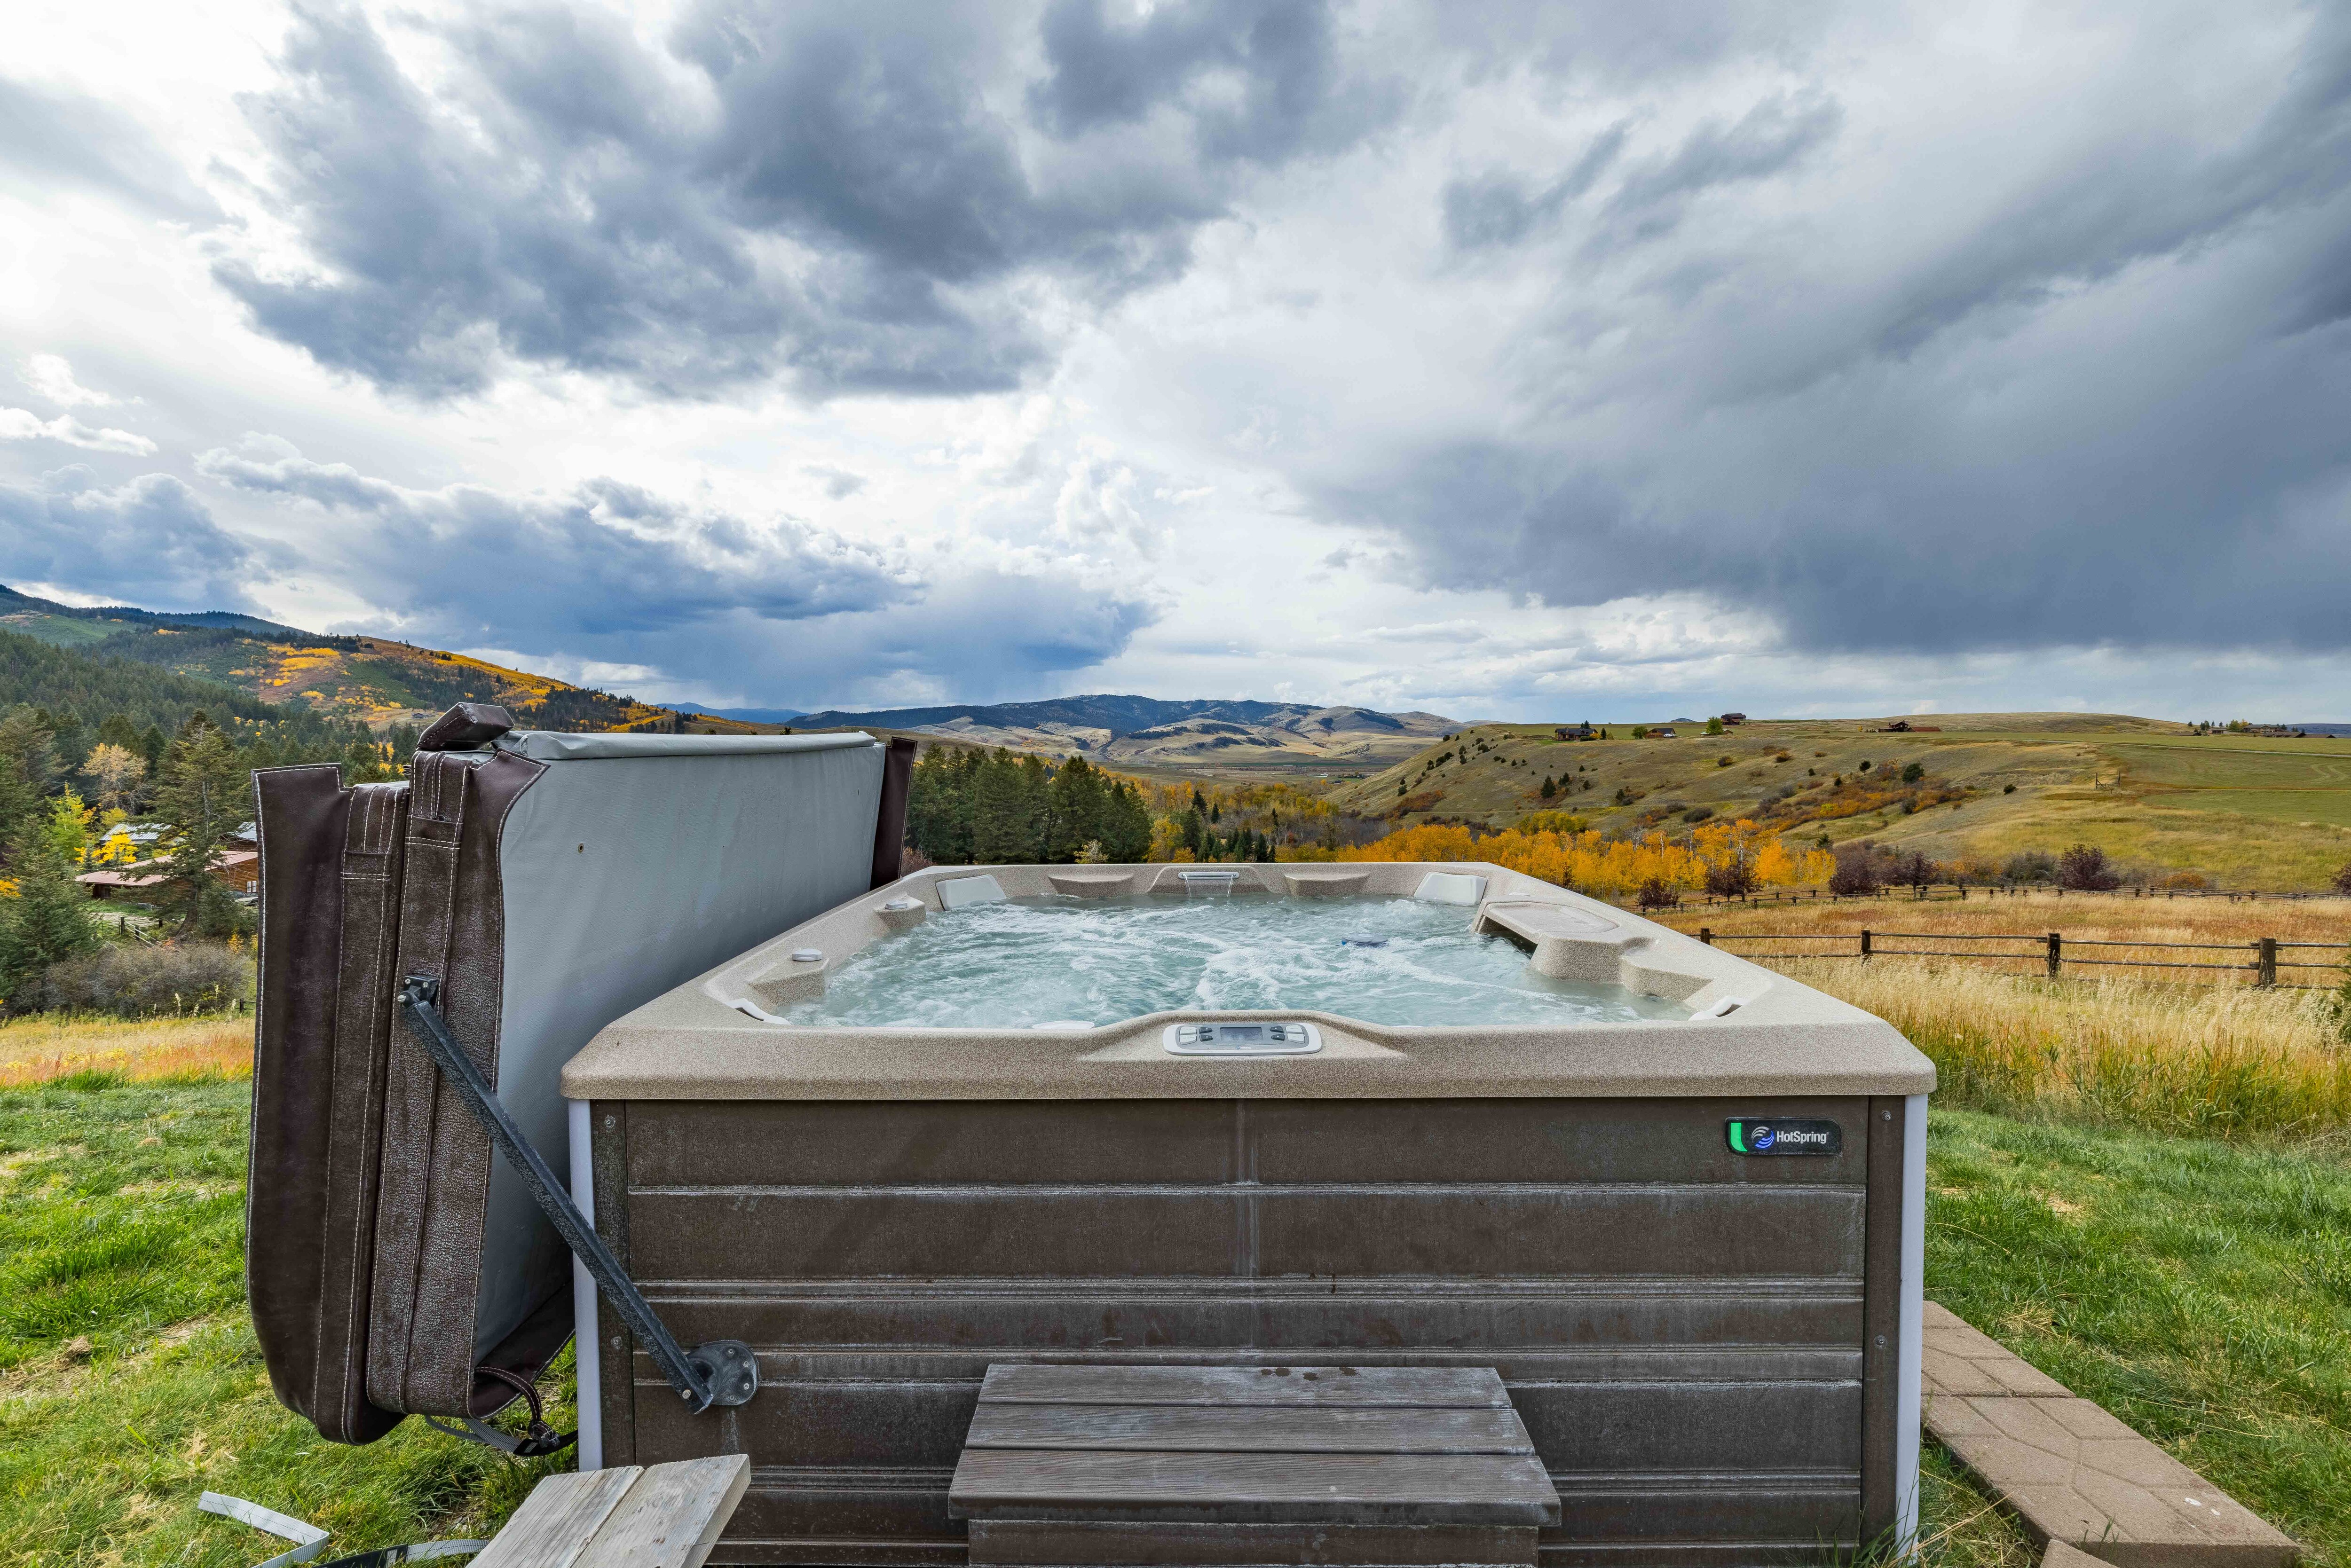 Amazing views from the hot tub!